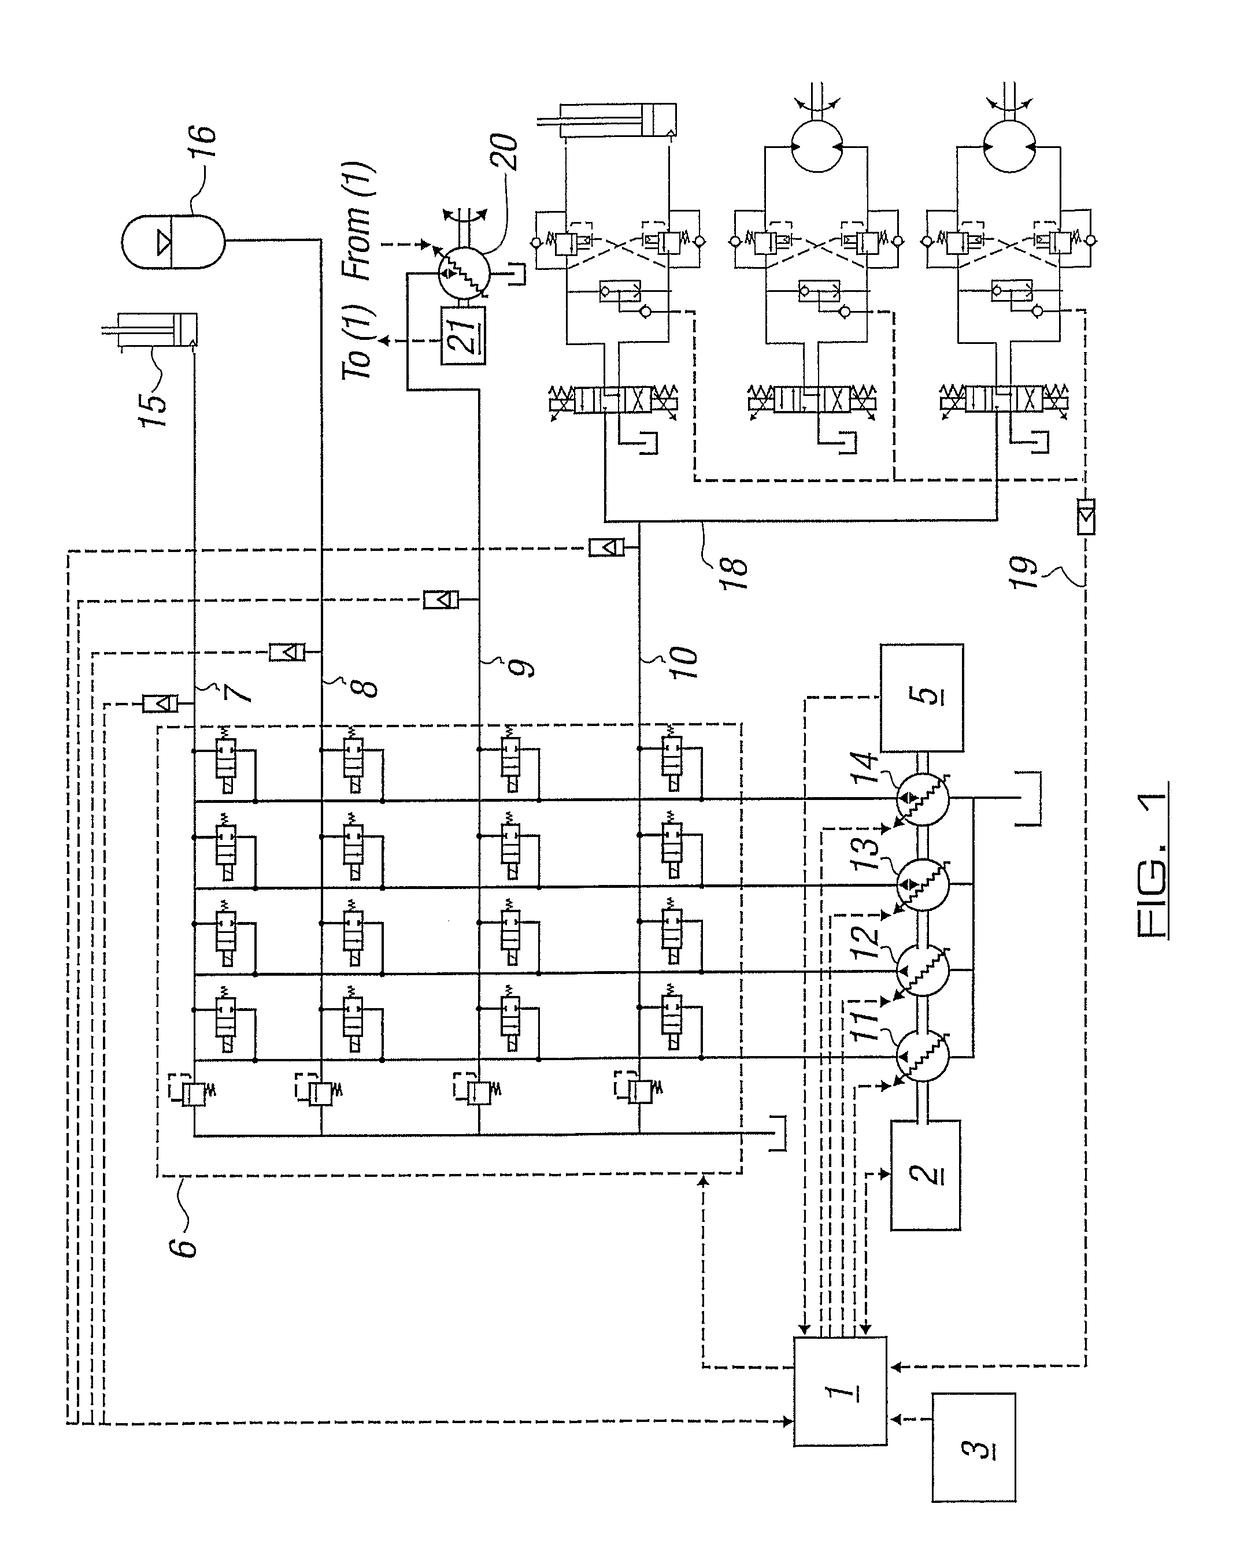 Fluid power distribution and control system